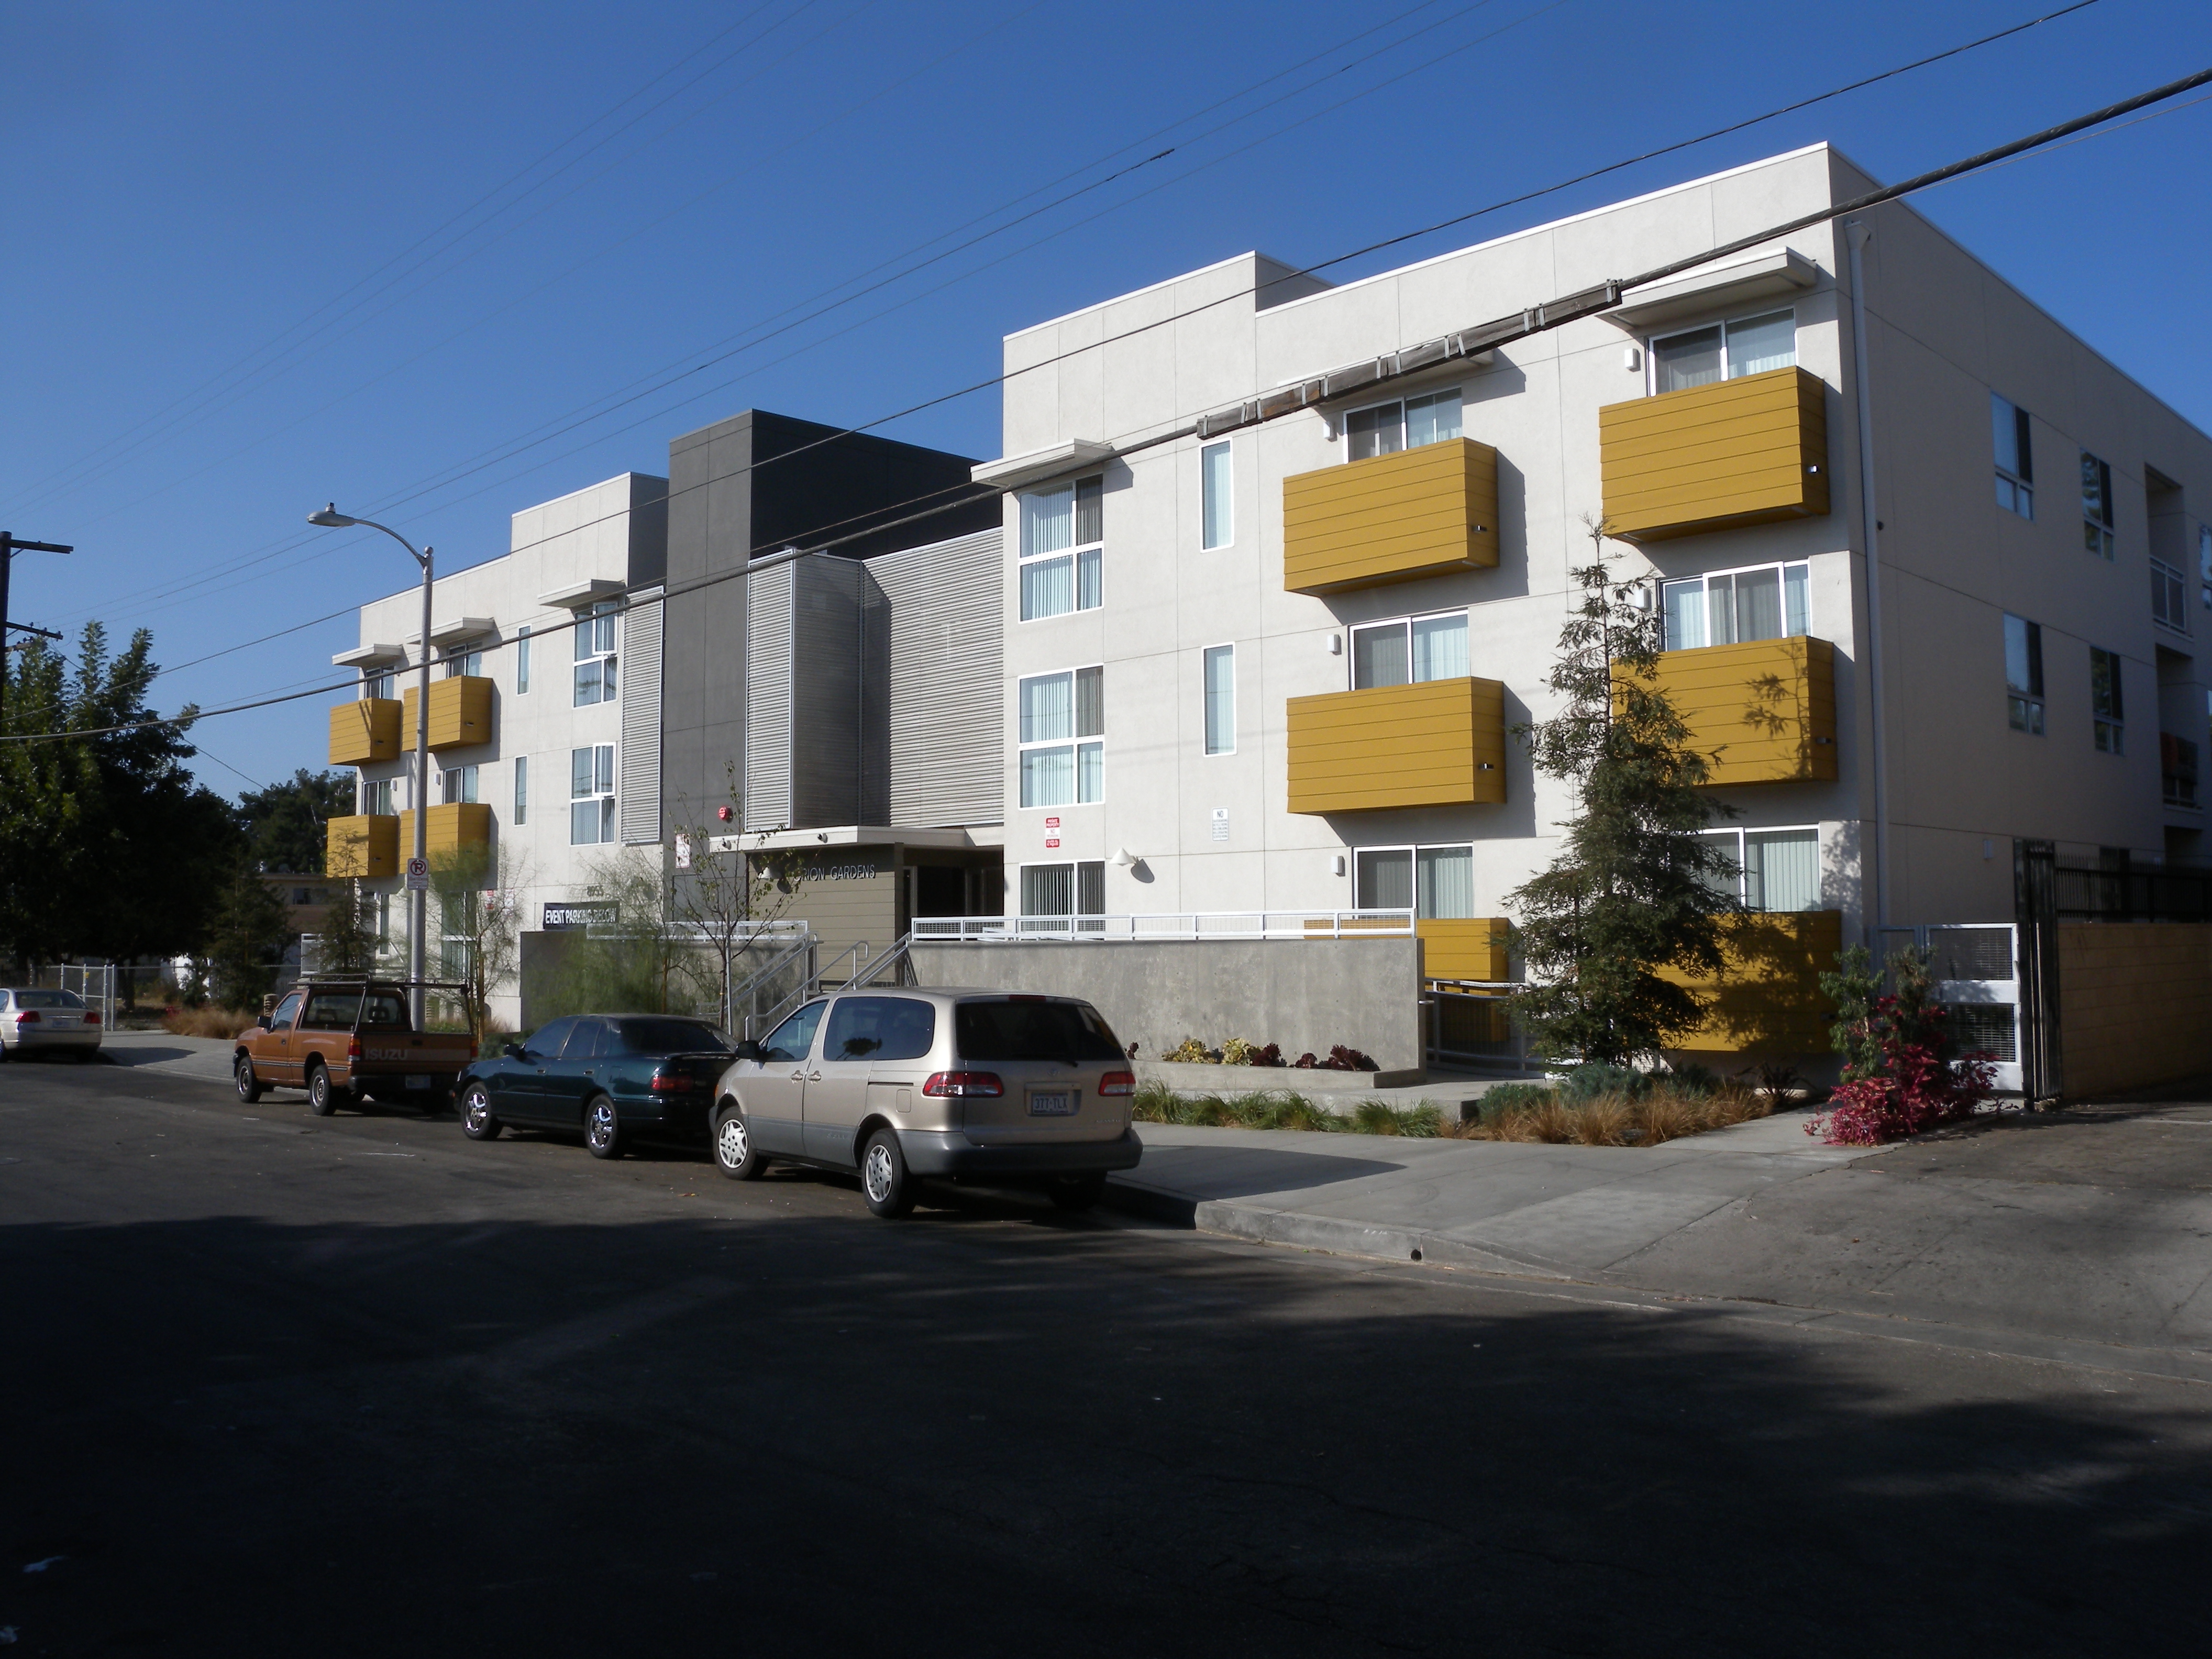 Three story white and gray modern building. There is ramp and stairway access for entry way. Building has mustard yellow balconies for units that face the front.